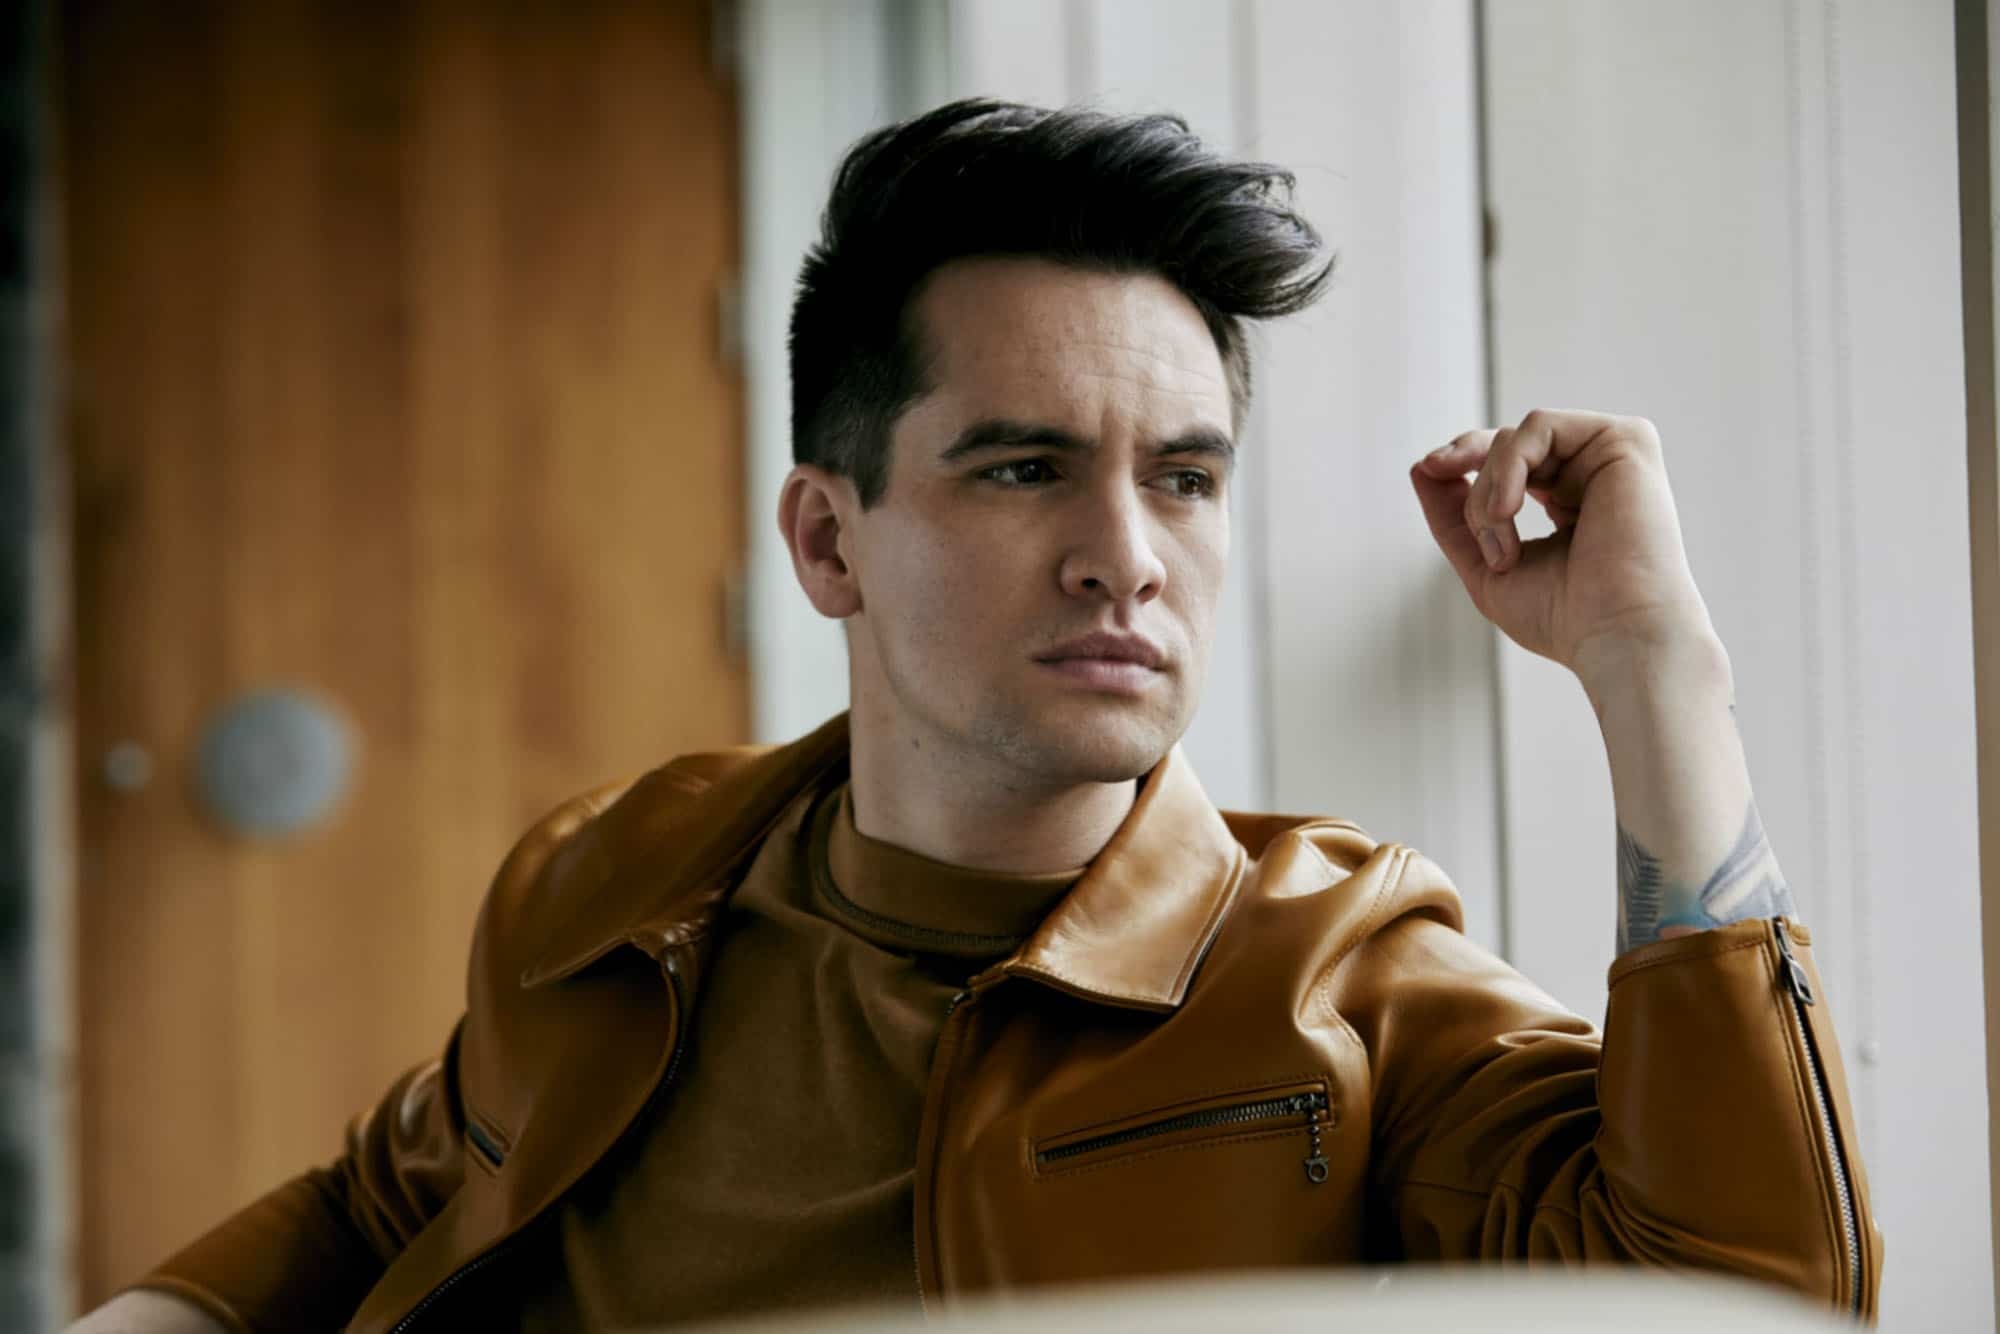 Brendon Urie: Panic! at the Disco has released seven studio albums with Urie as lead vocalist. 2000x1340 HD Wallpaper.